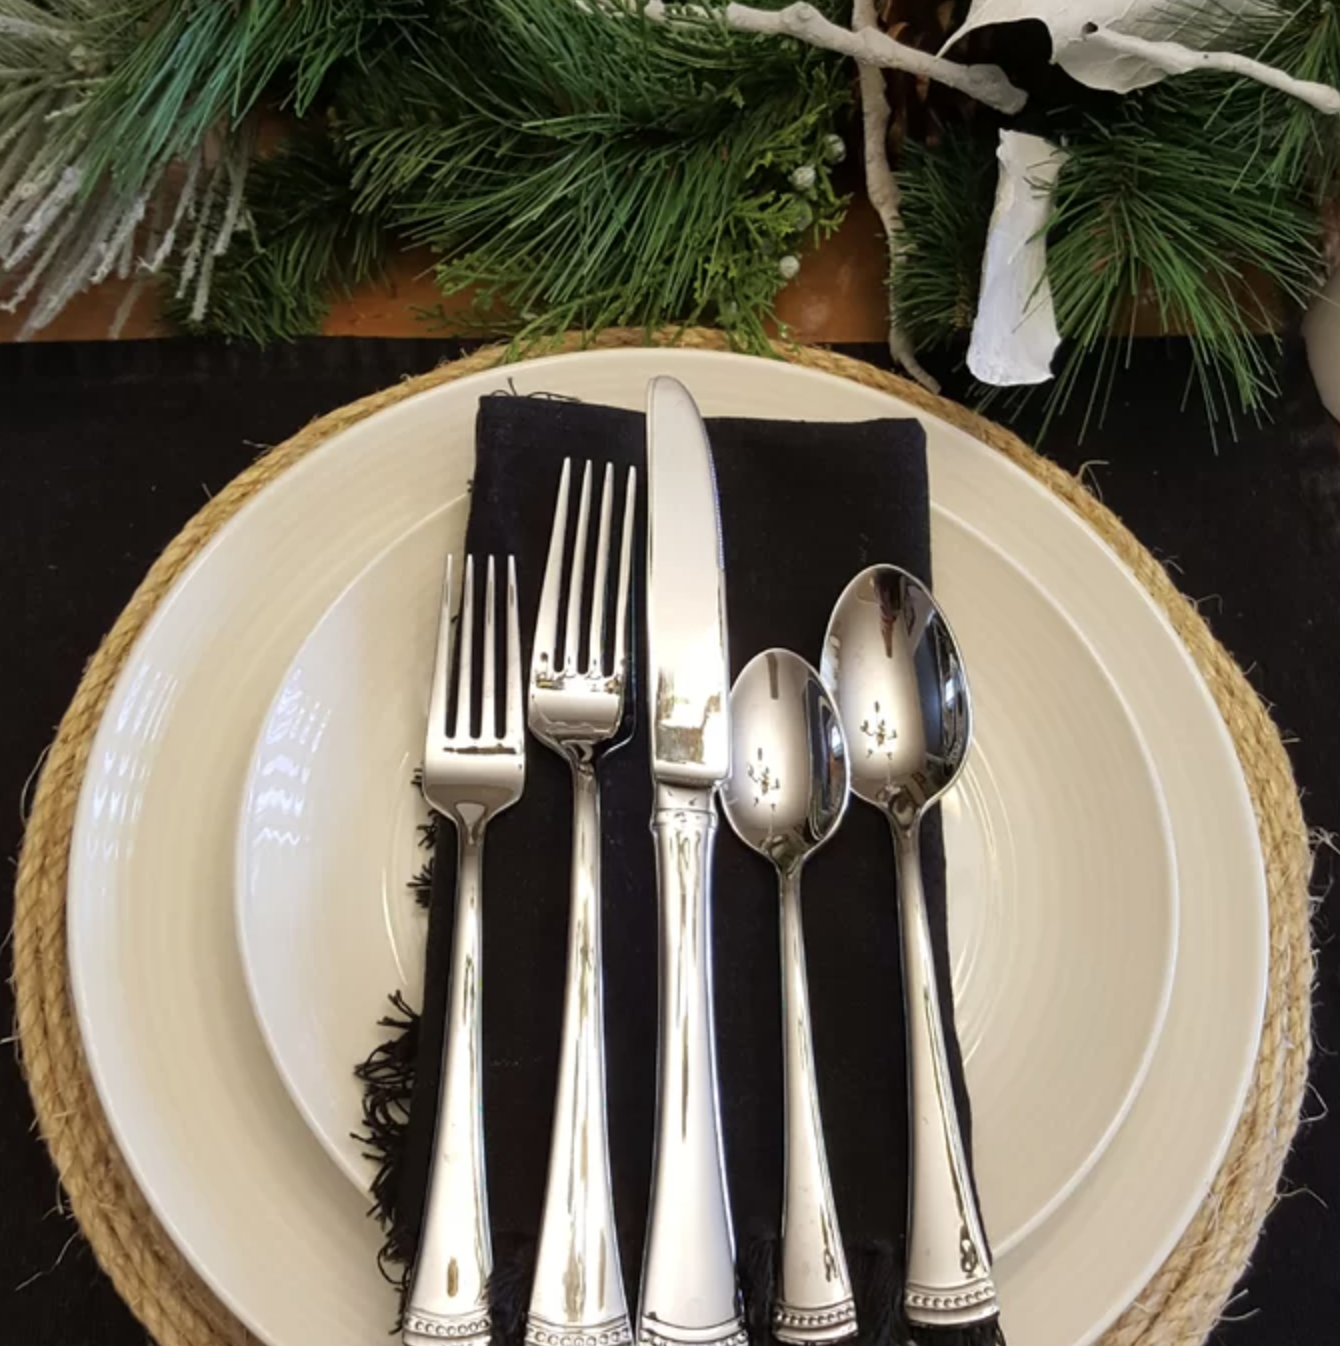 stainless steel forks, spoons, and knife on a plate